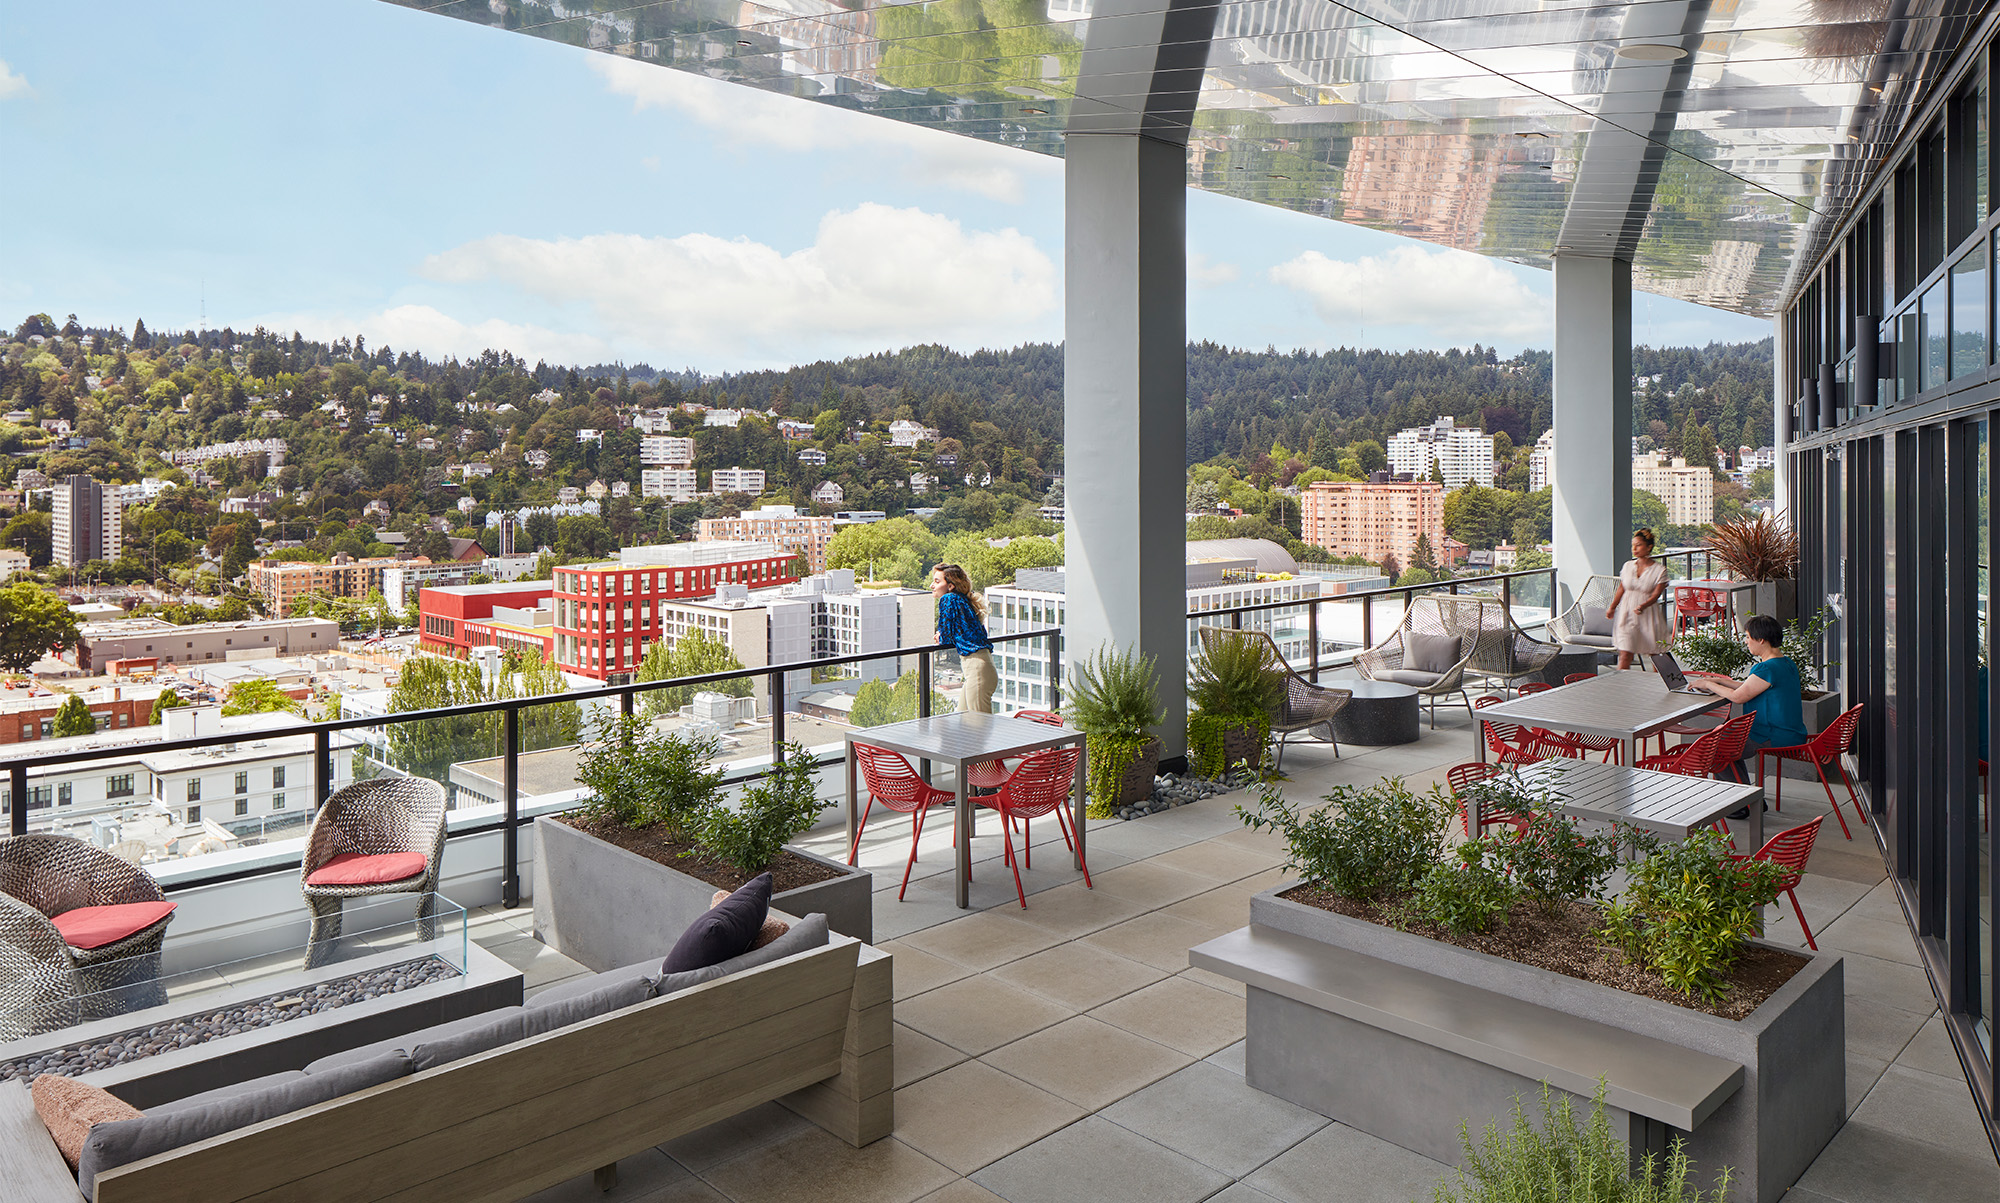 Rooftop multifamily residential complex in Portland, Oregon